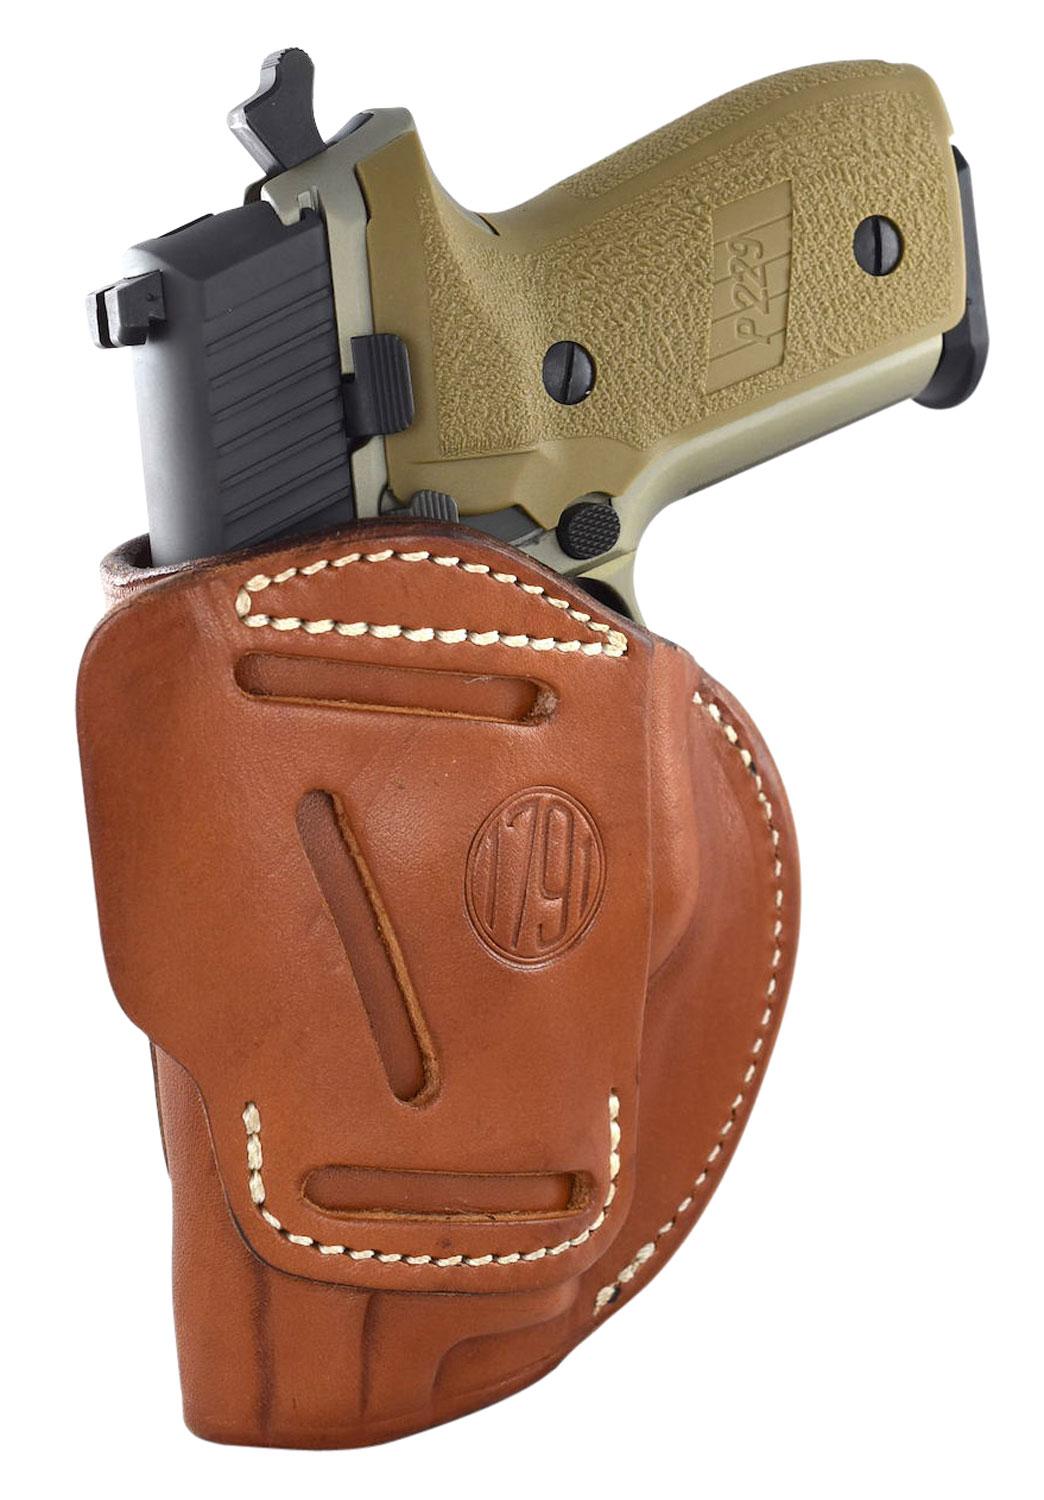  4 Way Holster Size 4 Right Hand